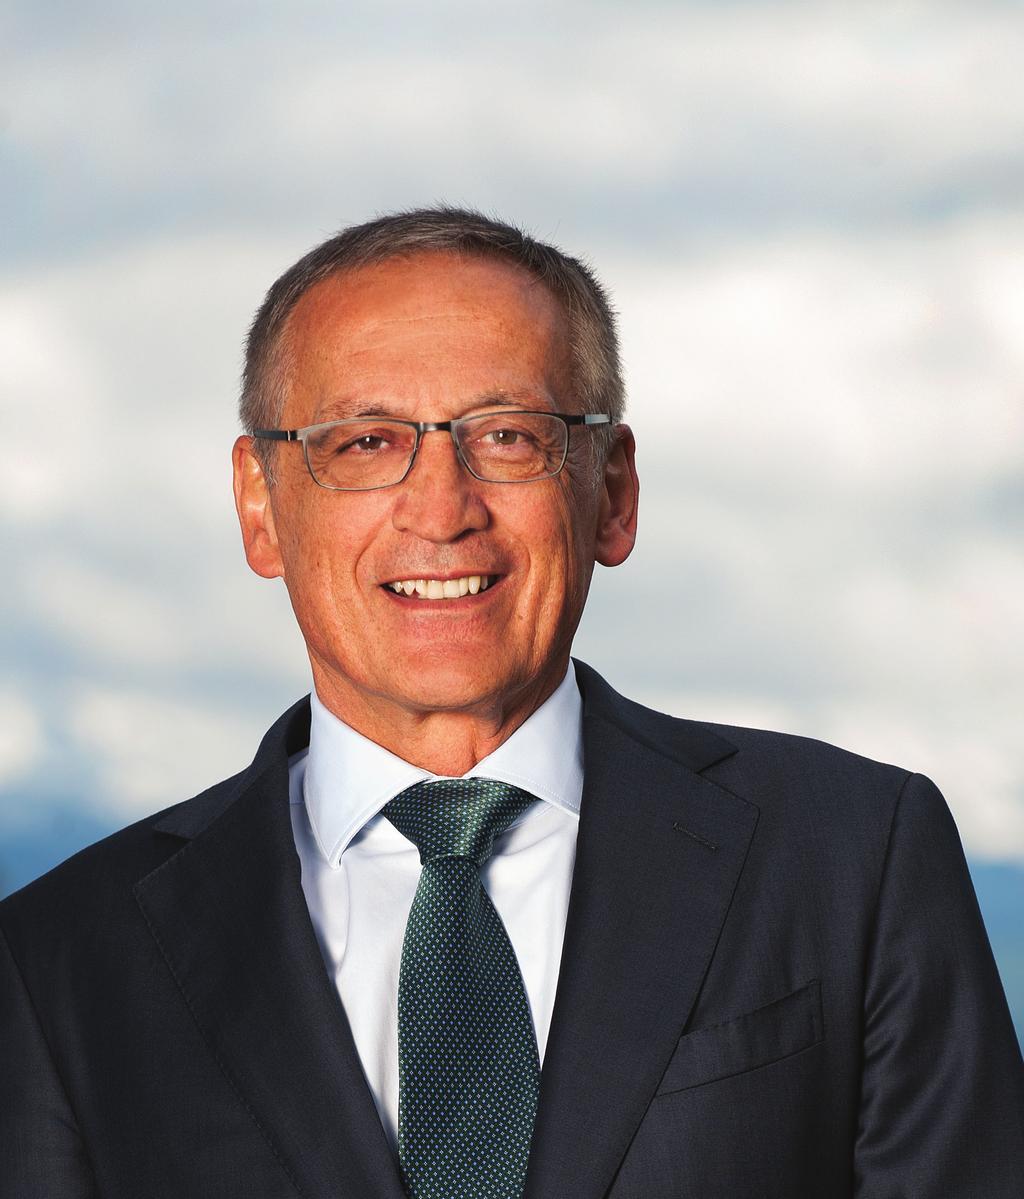 1 SWISS PROPERTY SUCCESS STORY LUCIANO GABRIEL CEO, PSP SWISS PROPERTY F ollowing on the last edition s interview with Shaftesbury, we speak to PSP Swiss Property, one of Switzerland s leading real